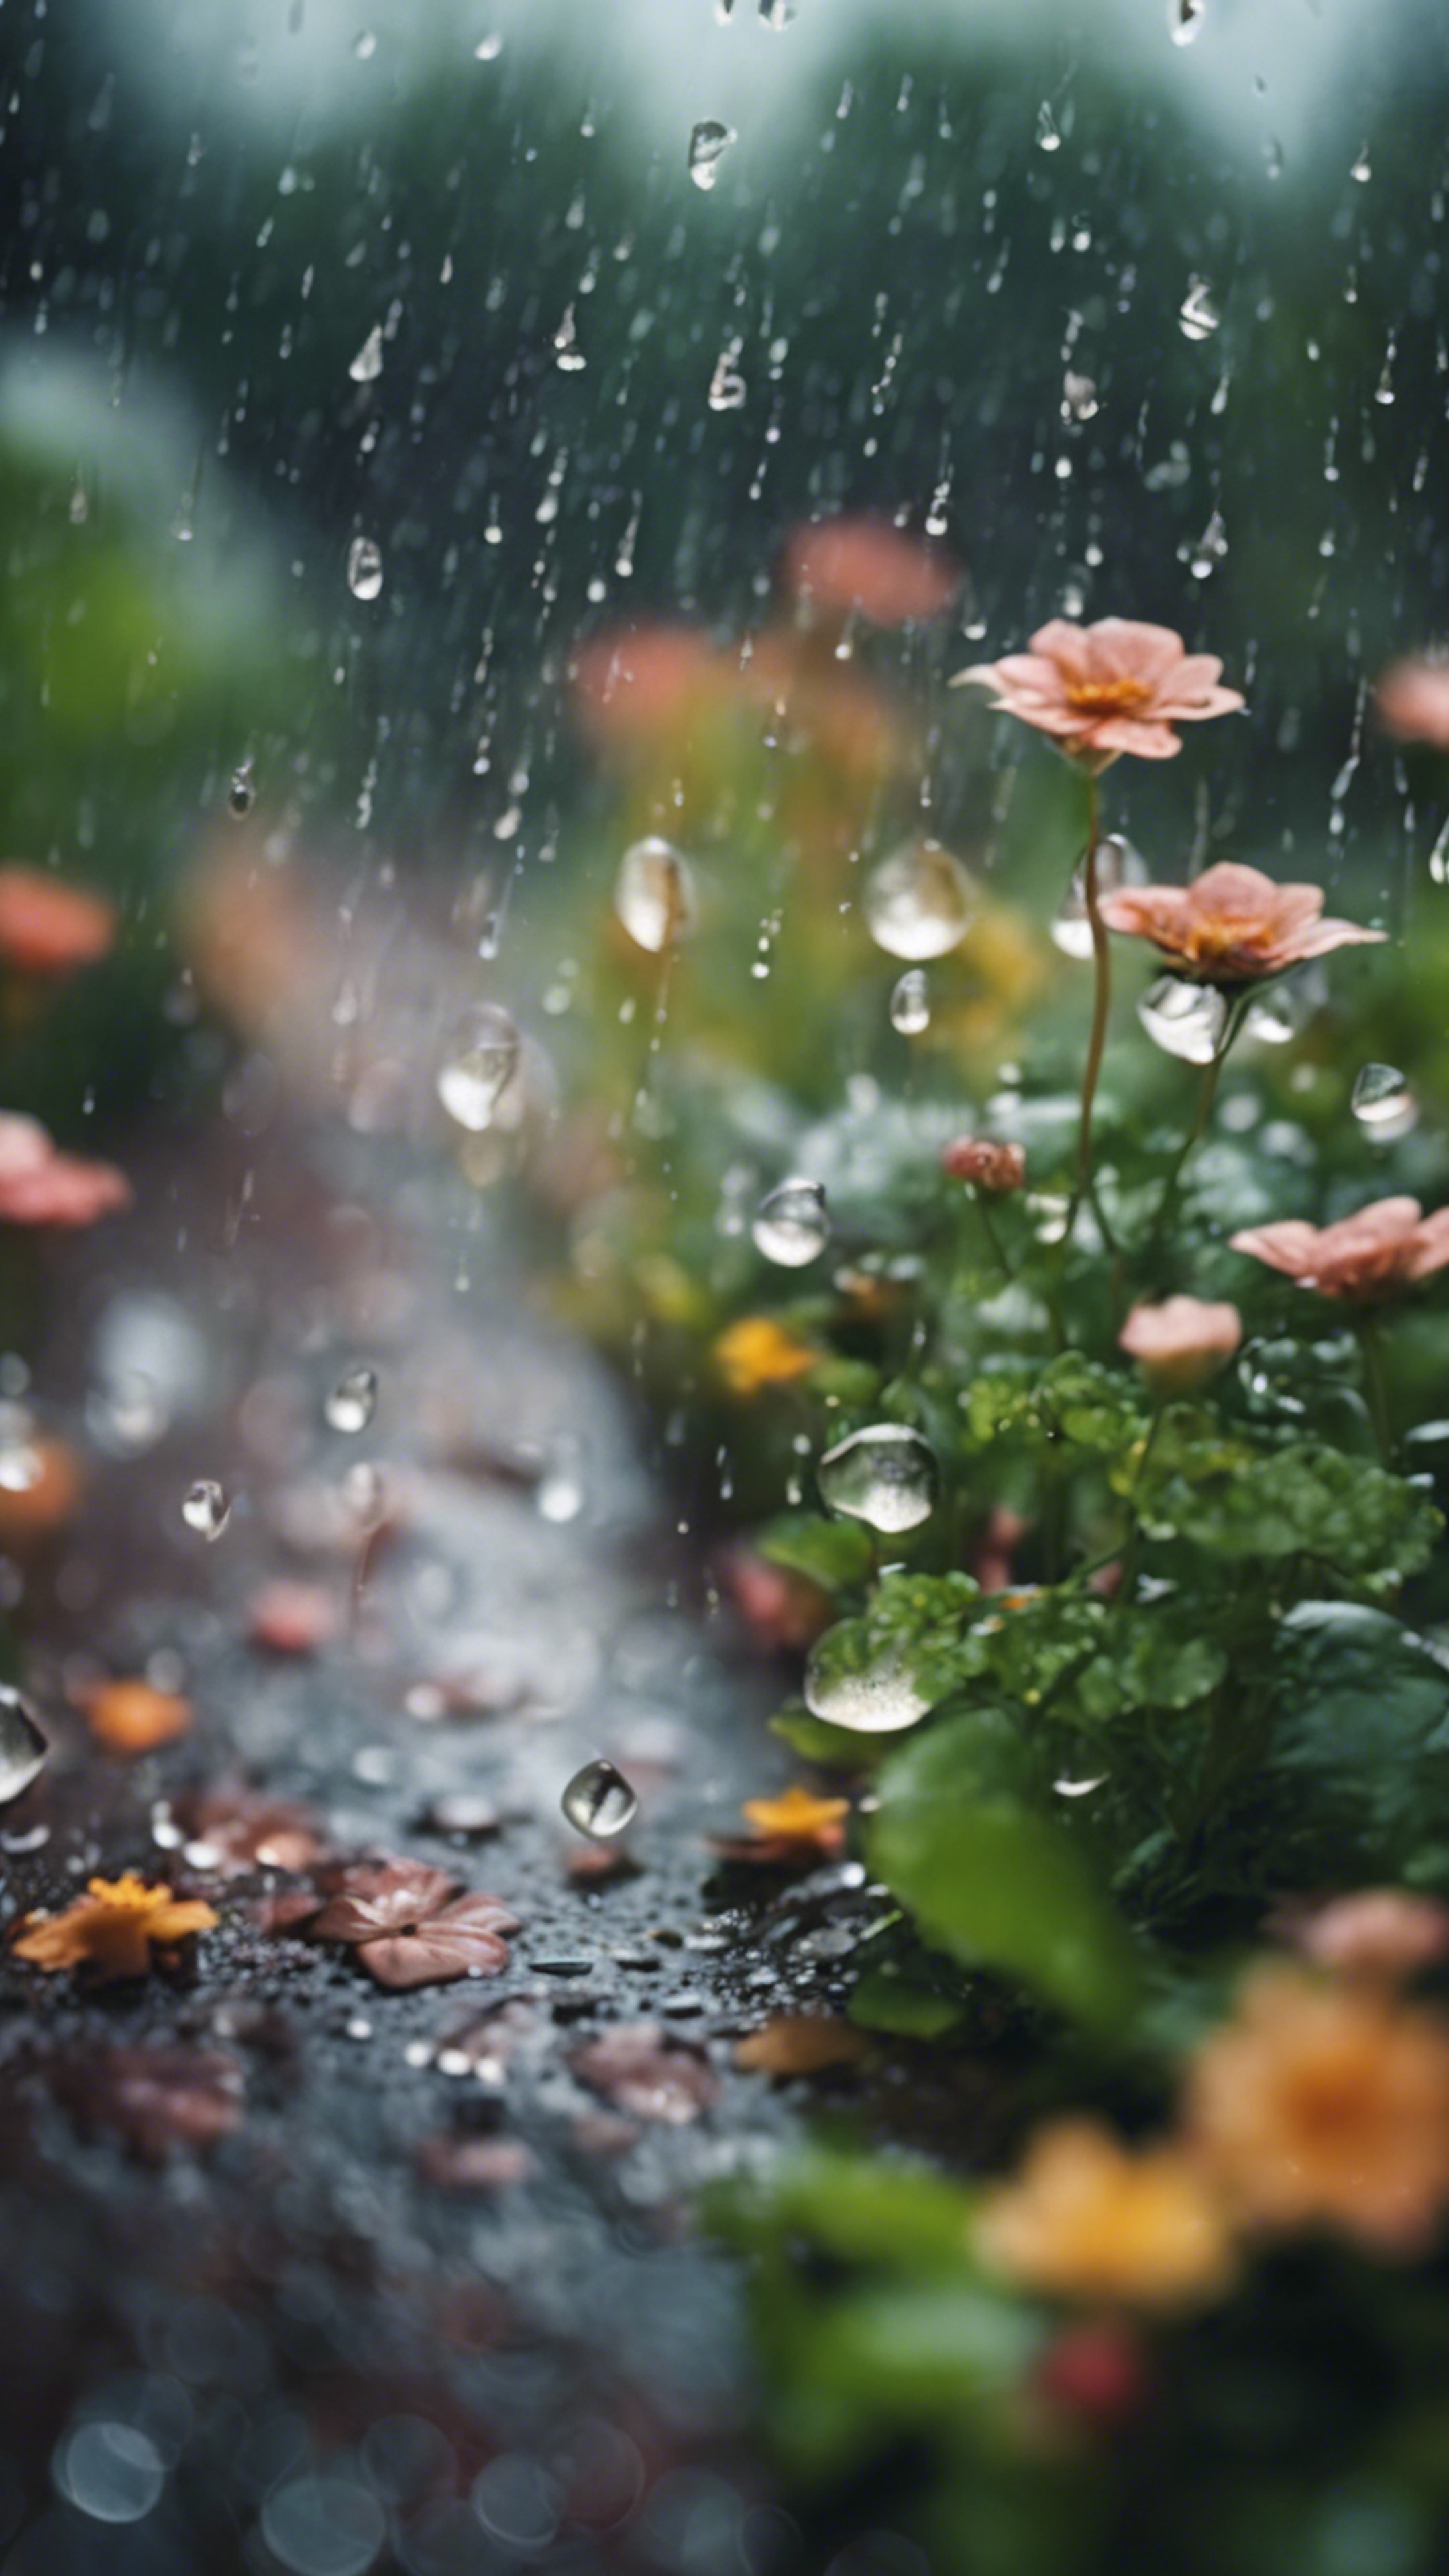 A tinkling rain garden during a soft rain shower, with raindrops dancing on the leaves and petals. Tapet[725596f4b8c5433598b7]